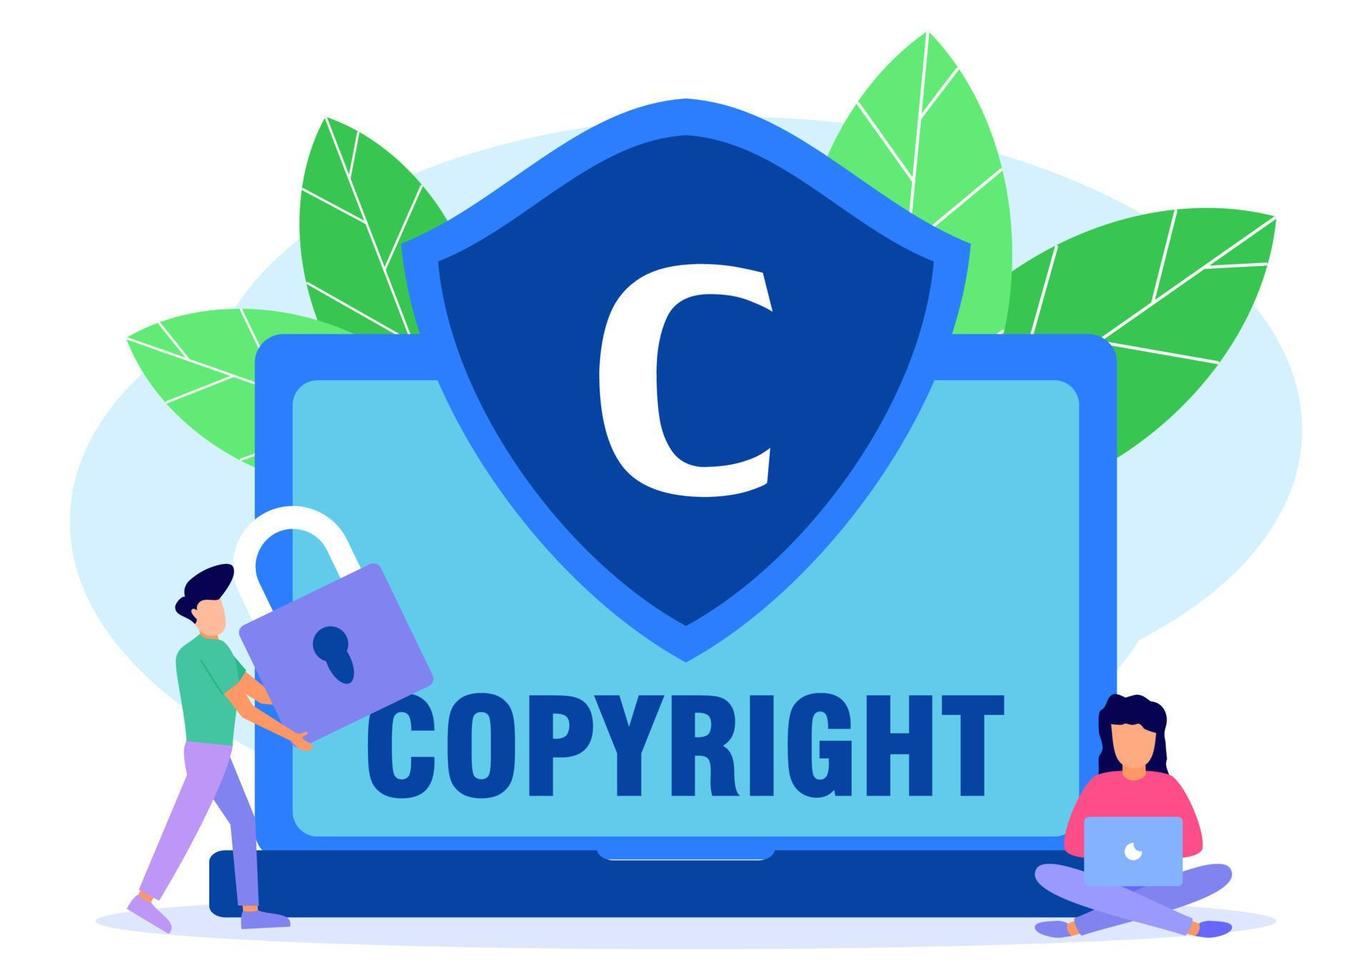 Illustration vector graphic cartoon character of copyright